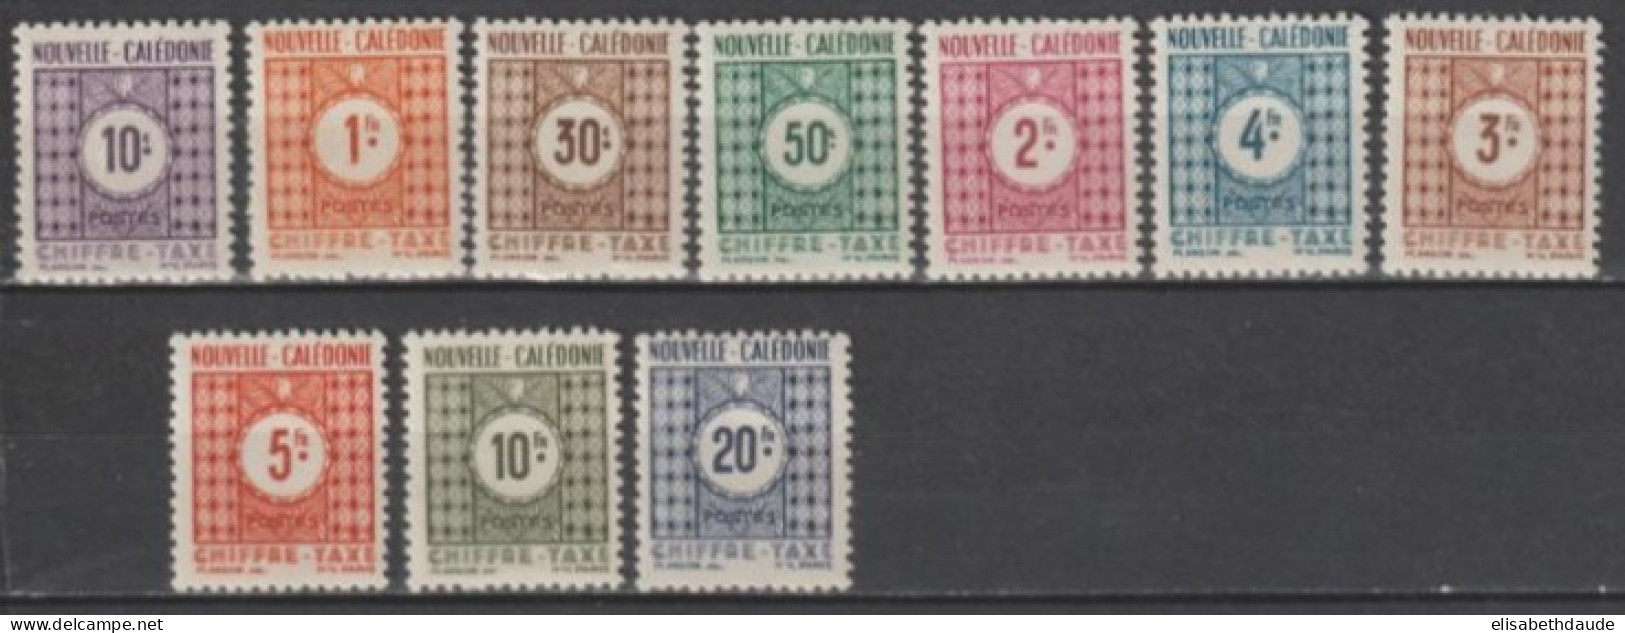 NOUVELLE CALEDONIE - 1948 - TAXE SERIE COMPLETE YVERT N°26/38 * MH  - COTE Pour * = 13 EUR - Unused Stamps